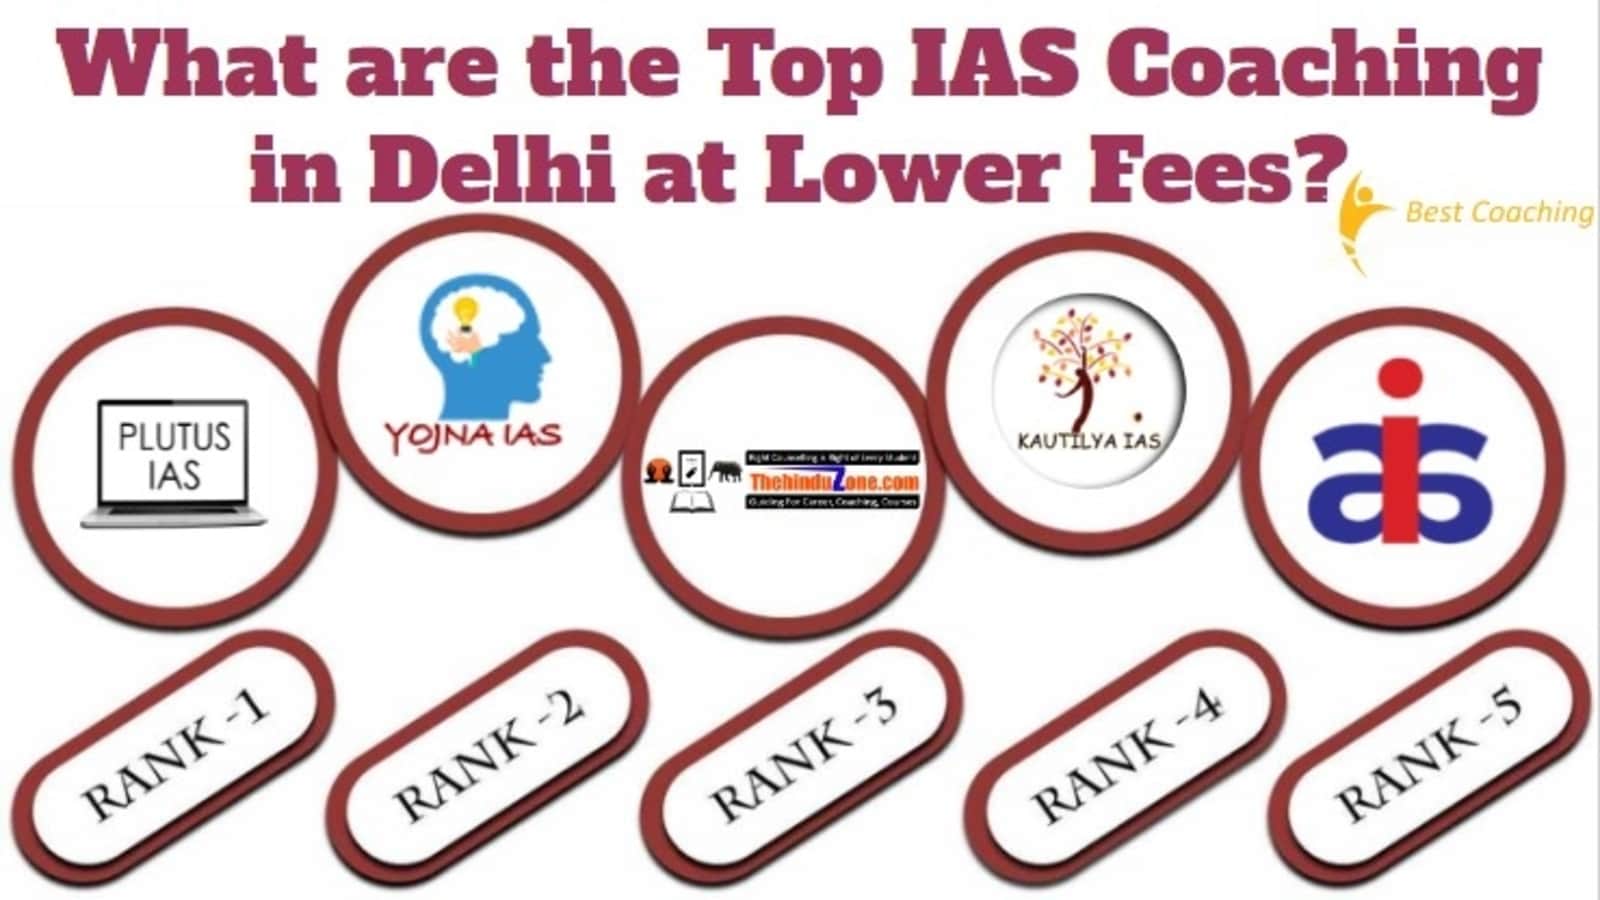 Best IAS Coaching in Delhi at Lower Fees